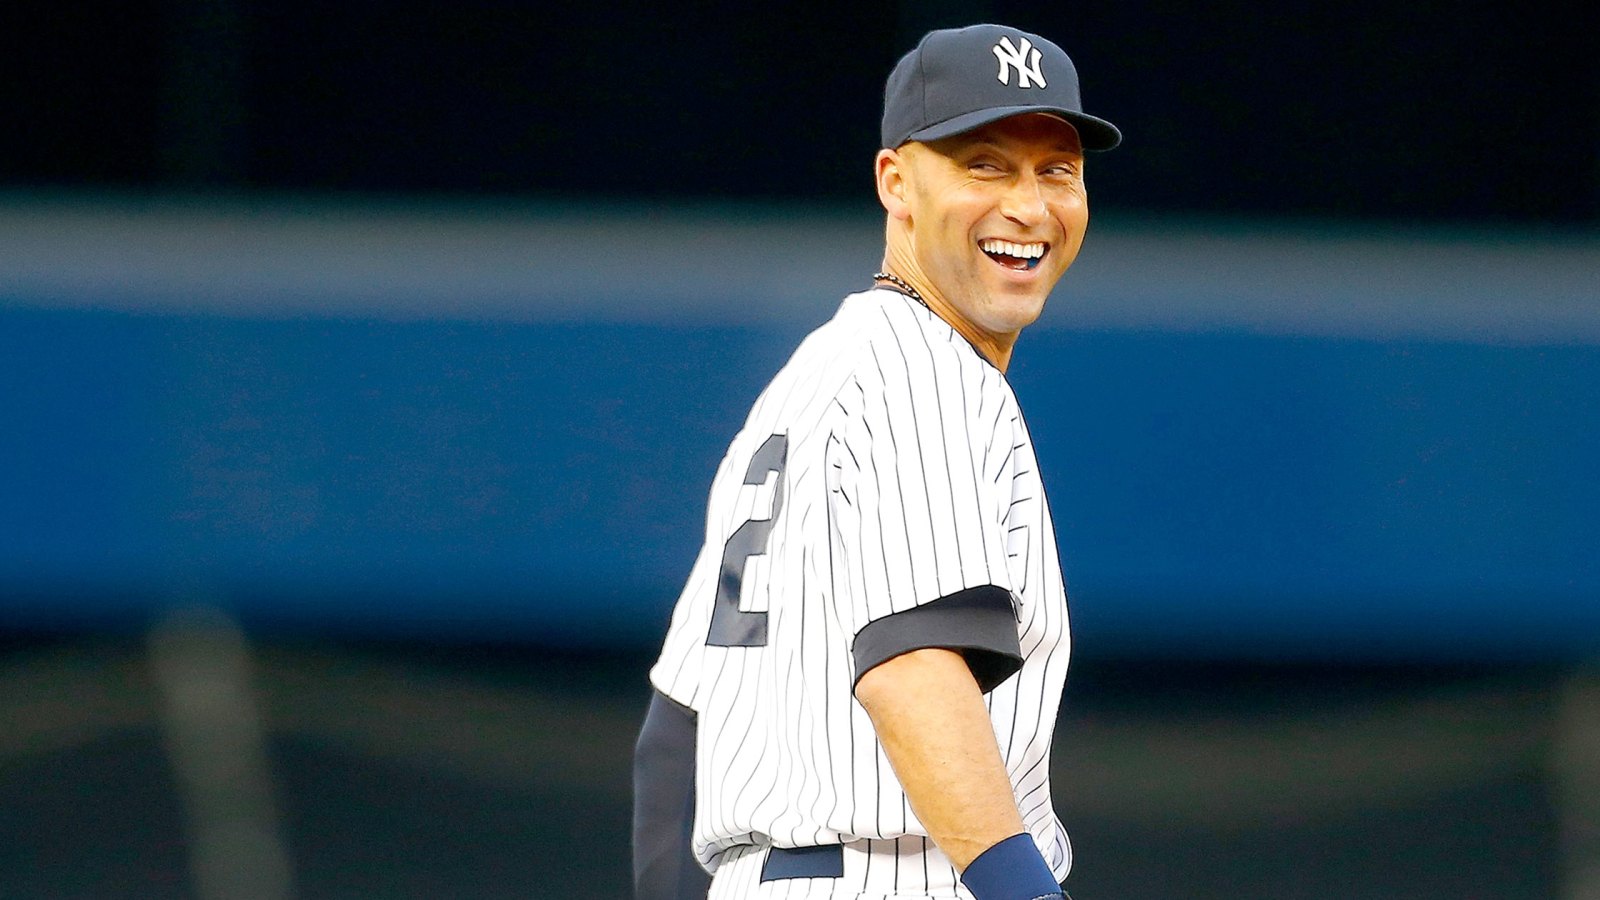 Derek Jeter all class, goes out on his terms